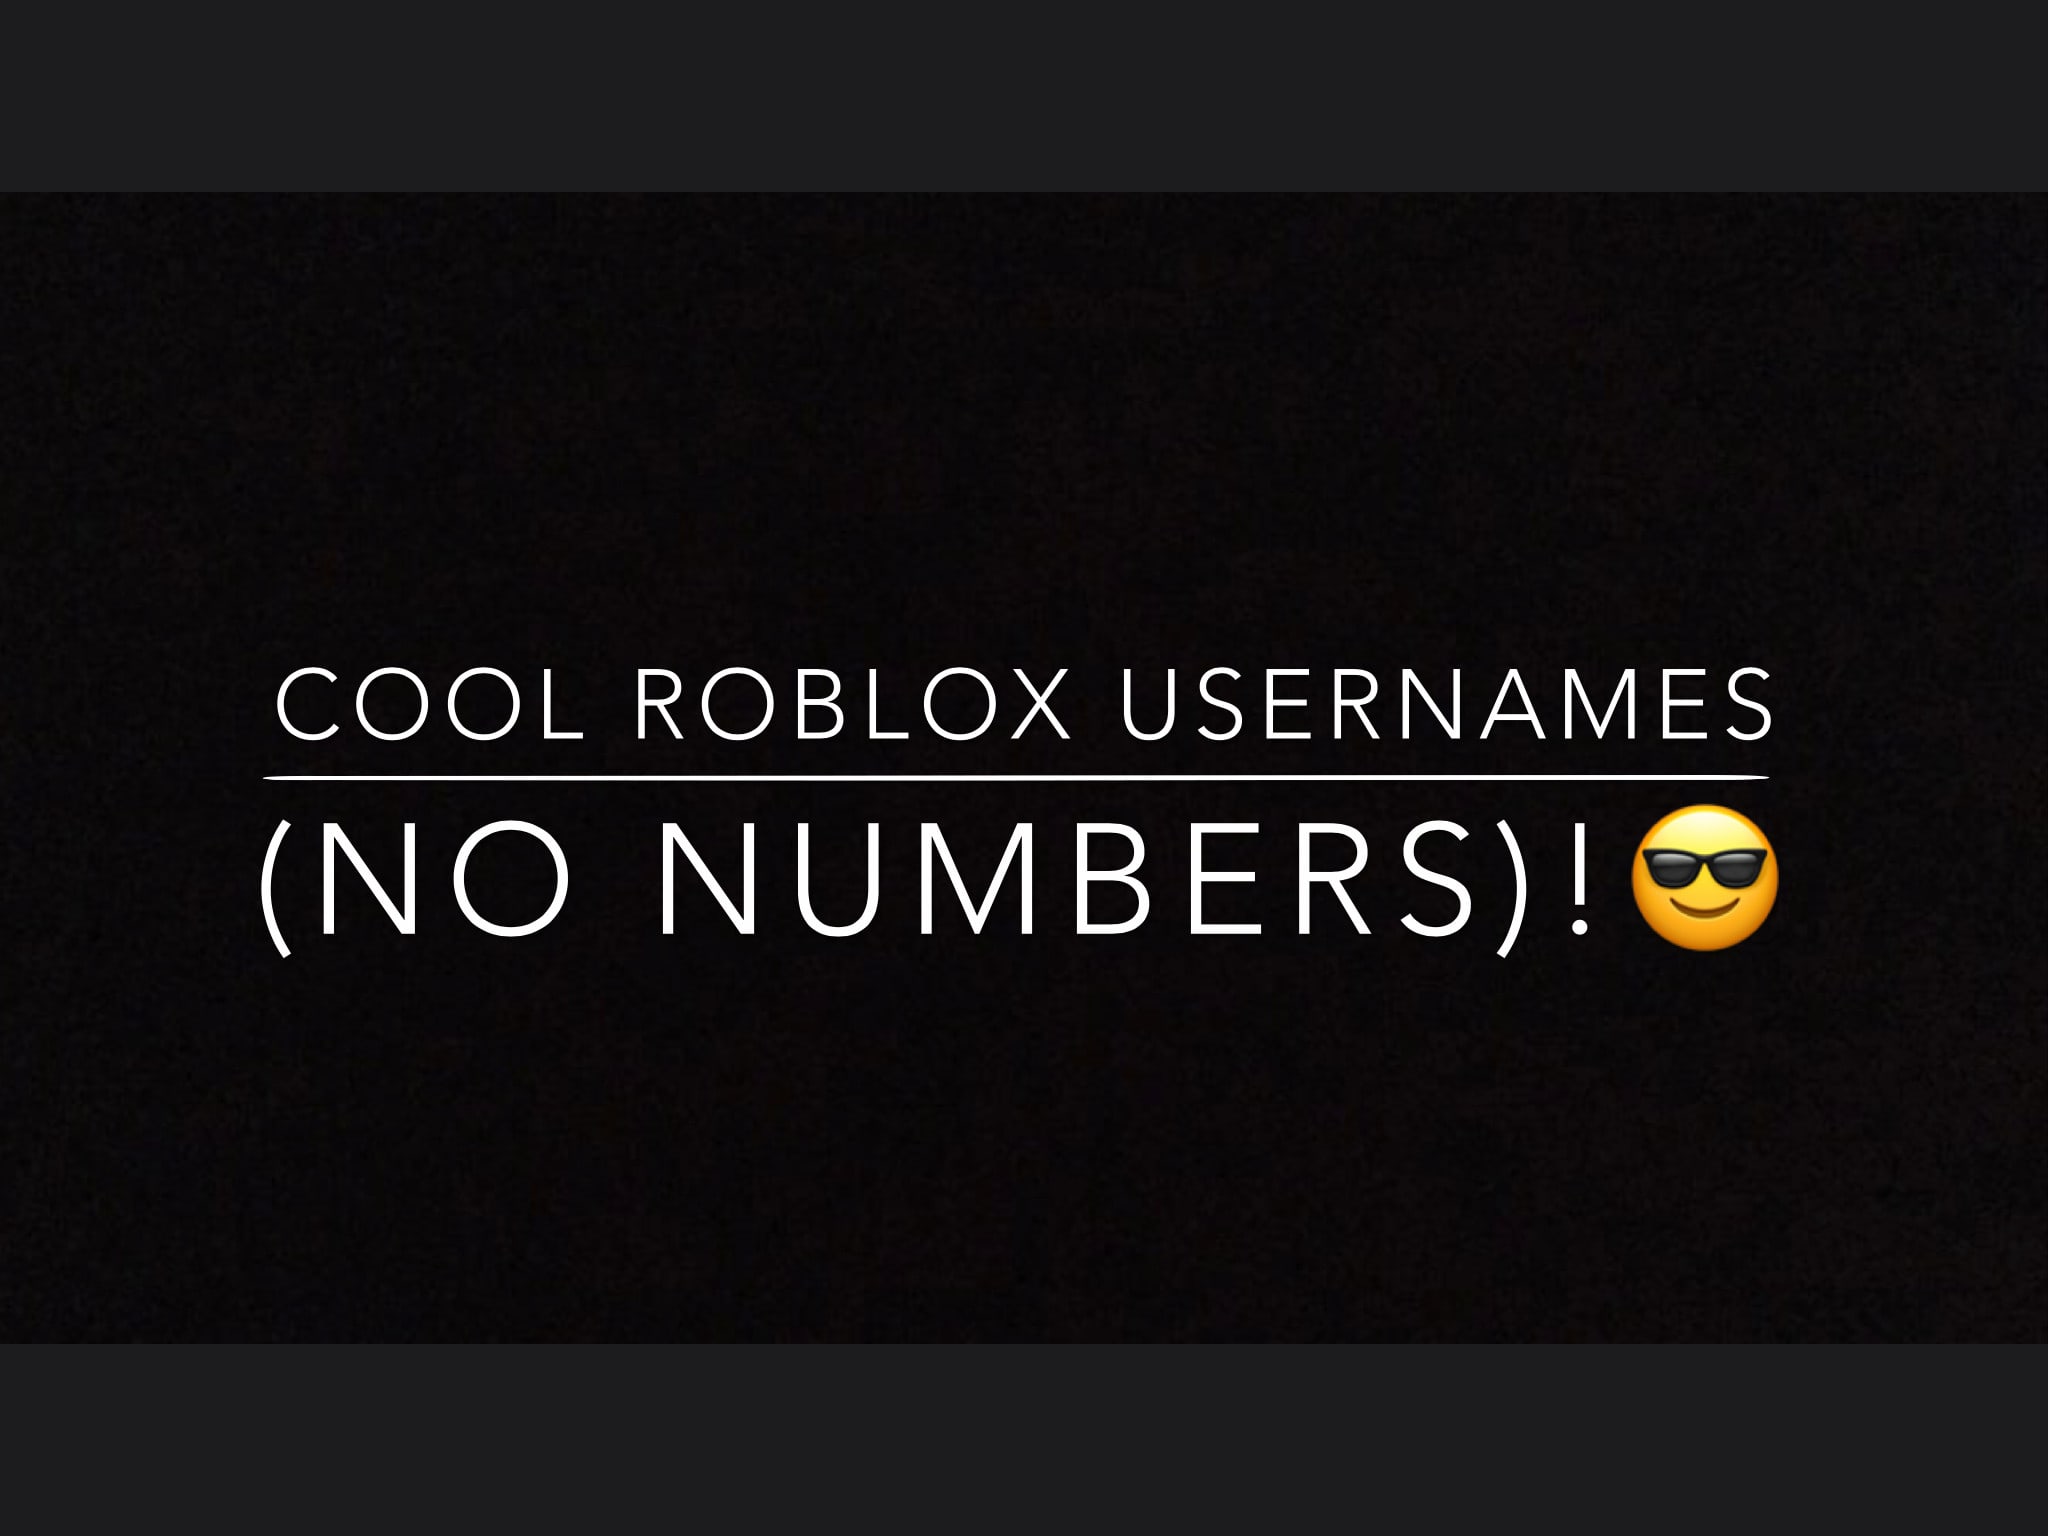 Offer You Cool Roblox Usernames By Ciunkyz - logo cool roblox sign